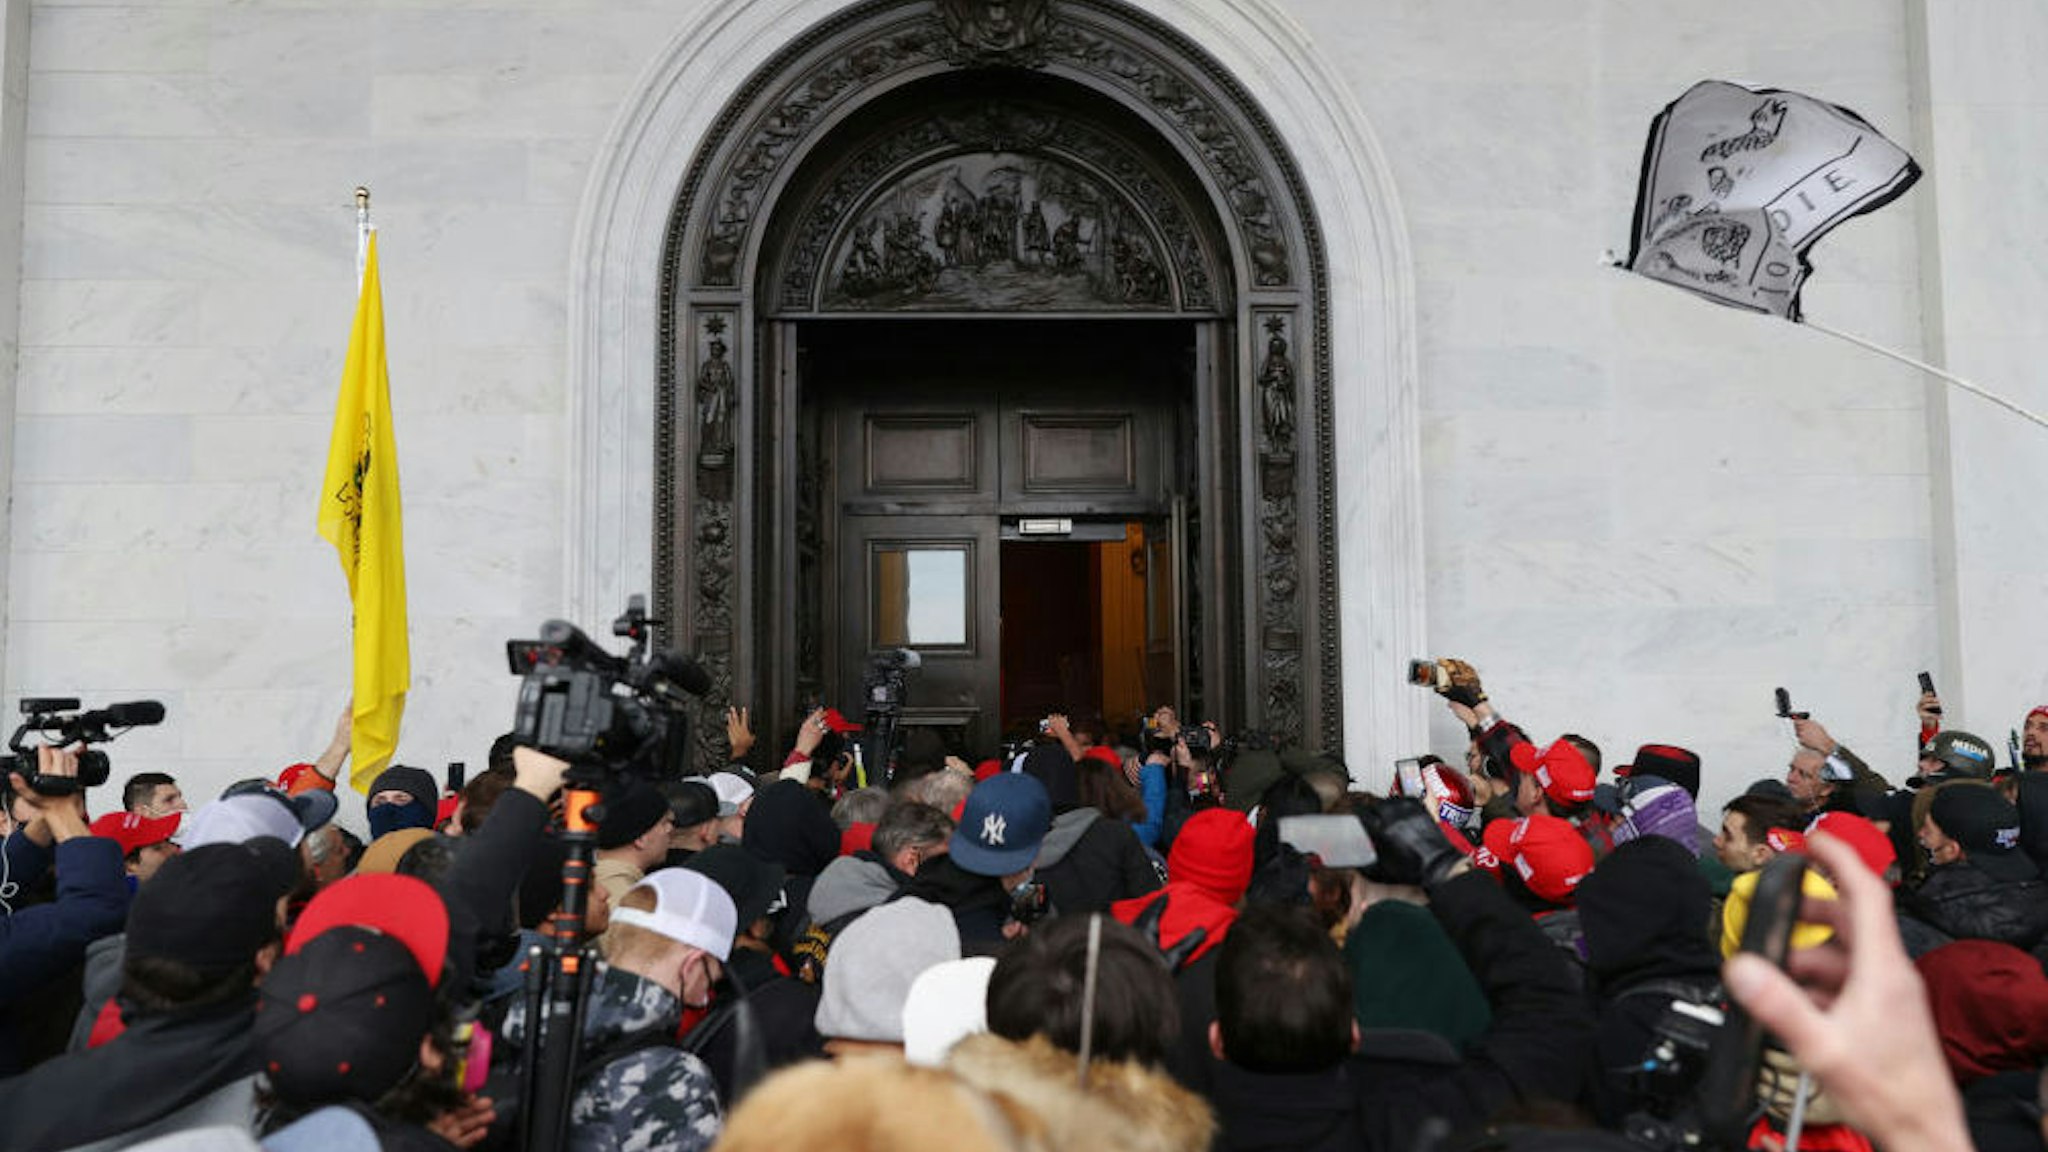 WASHINGTON, DC - JANUARY 06: Protesters gather at the door of the U.S. Capitol Building on January 06, 2021 in Washington, DC. Pro-Trump protesters entered the U.S. Capitol building after mass demonstrations in the nation's capital during a joint session Congress to ratify President-elect Joe Biden's 306-232 Electoral College win over President Donald Trump.